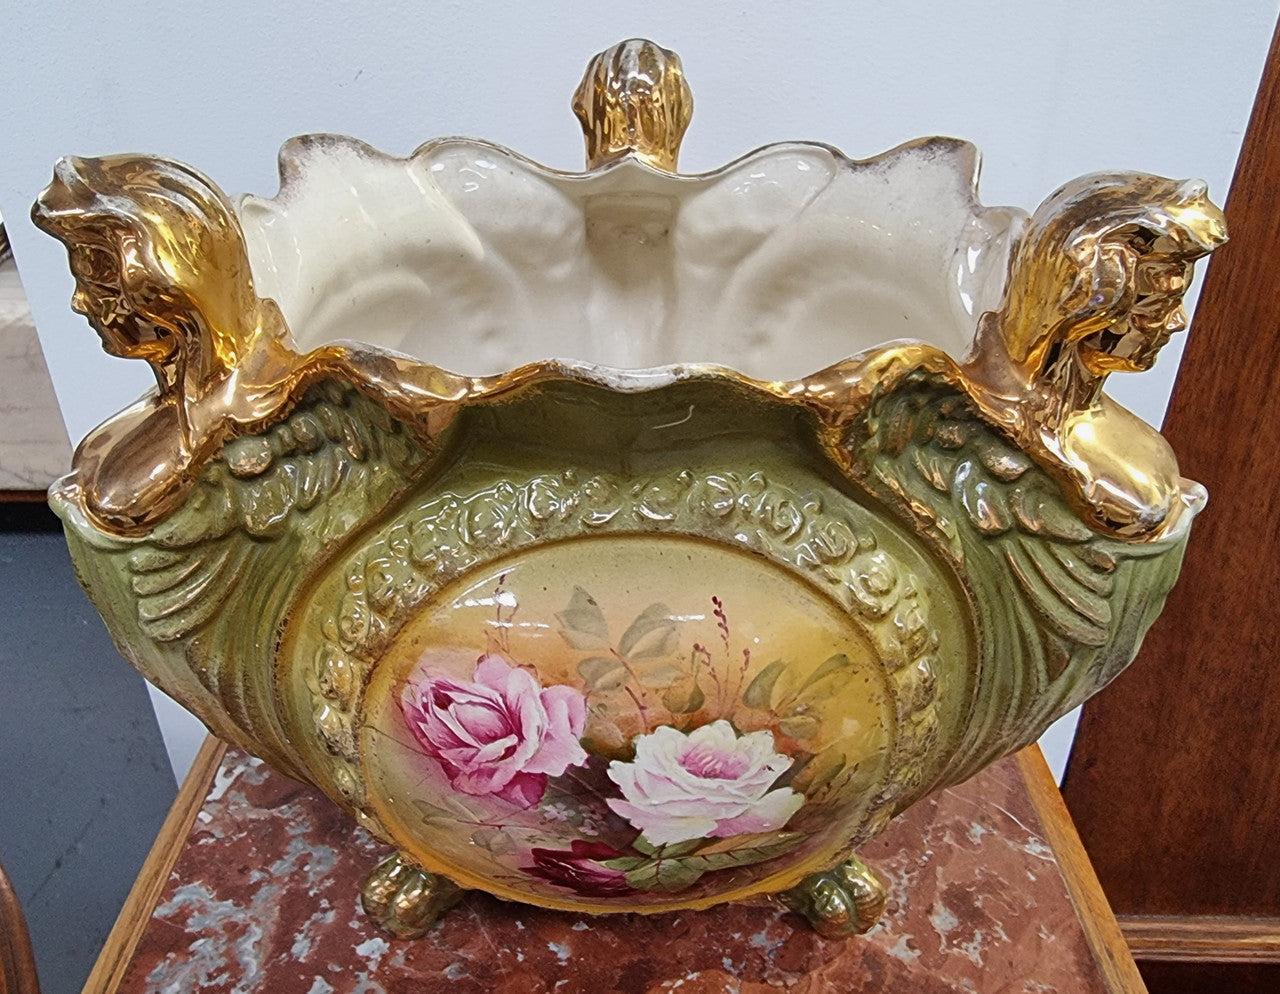 Large late Victorian English jardinière featuring three women figureheads. In good condition some loss to gilding on the figureheads, place view photos as they help form part of the description.